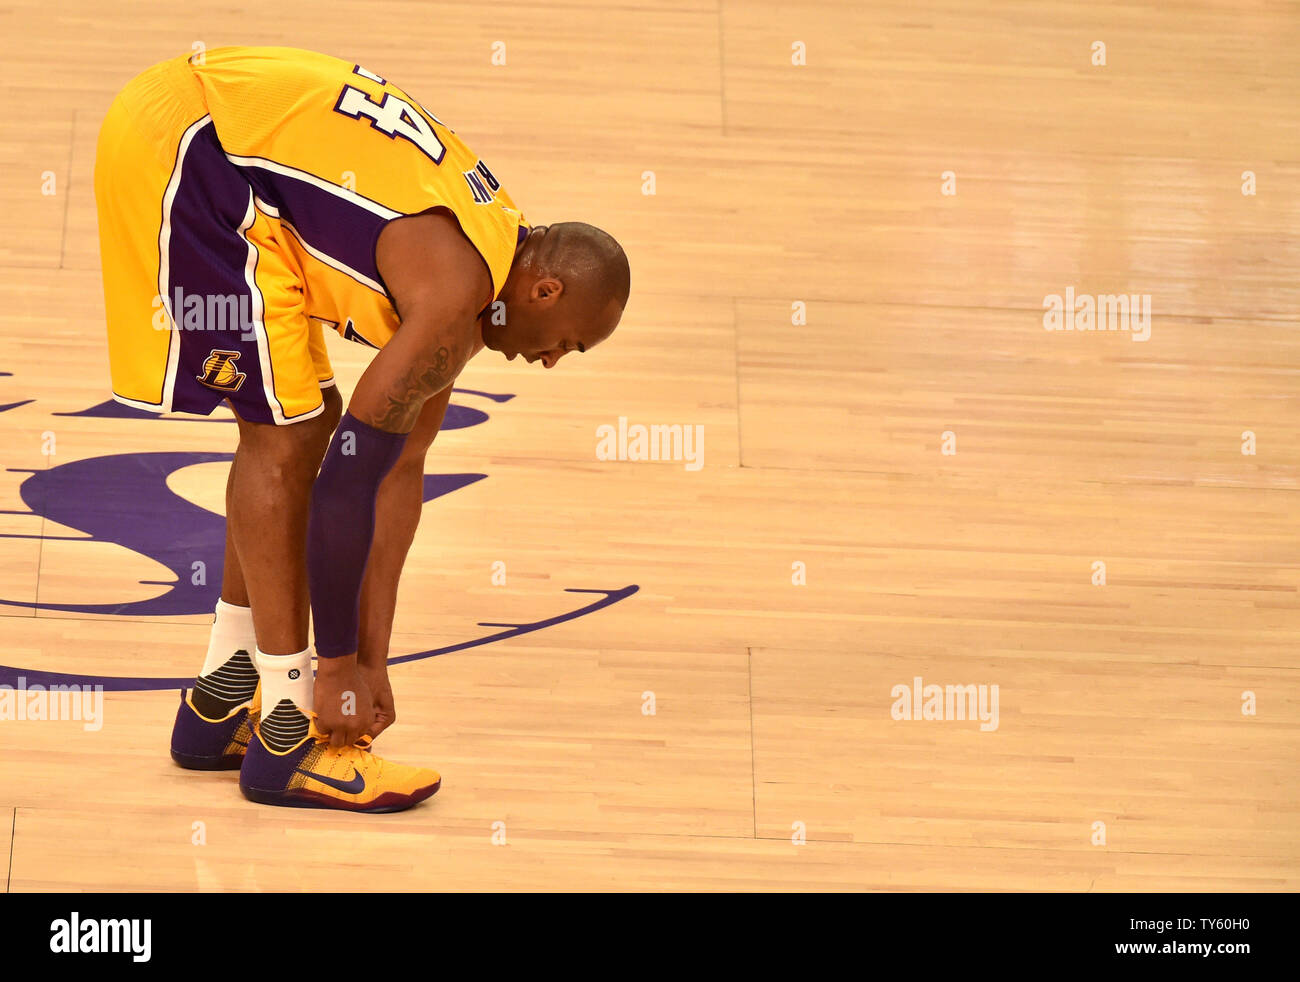 Los Angeles Lakers Kobe Bryant ties his shoe during game against the San Antonio Spurs at Staples Center in Los Angeles on January 22, 2016. Photo by Jon SooHoo/UPI Stock Photo